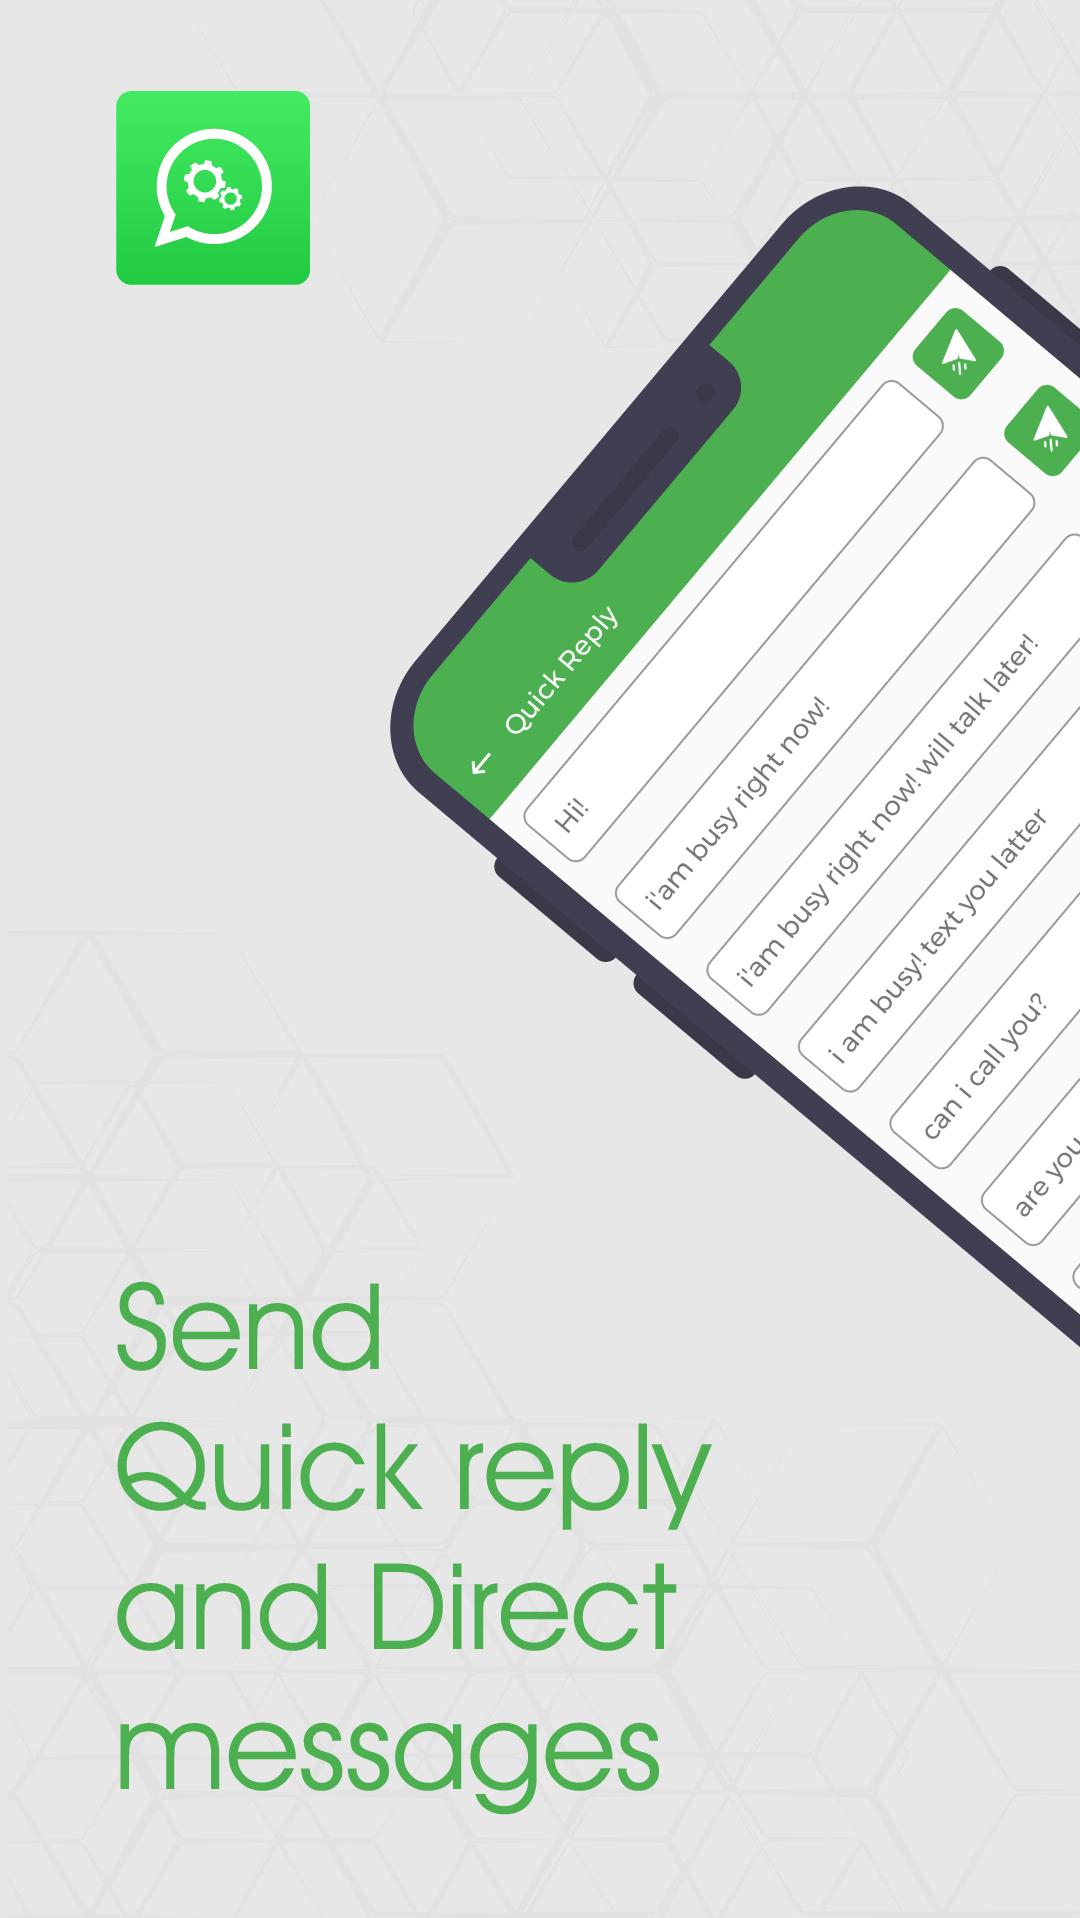 WhatsManager-Multi-Tasker For whatsapp for Android - APK Download